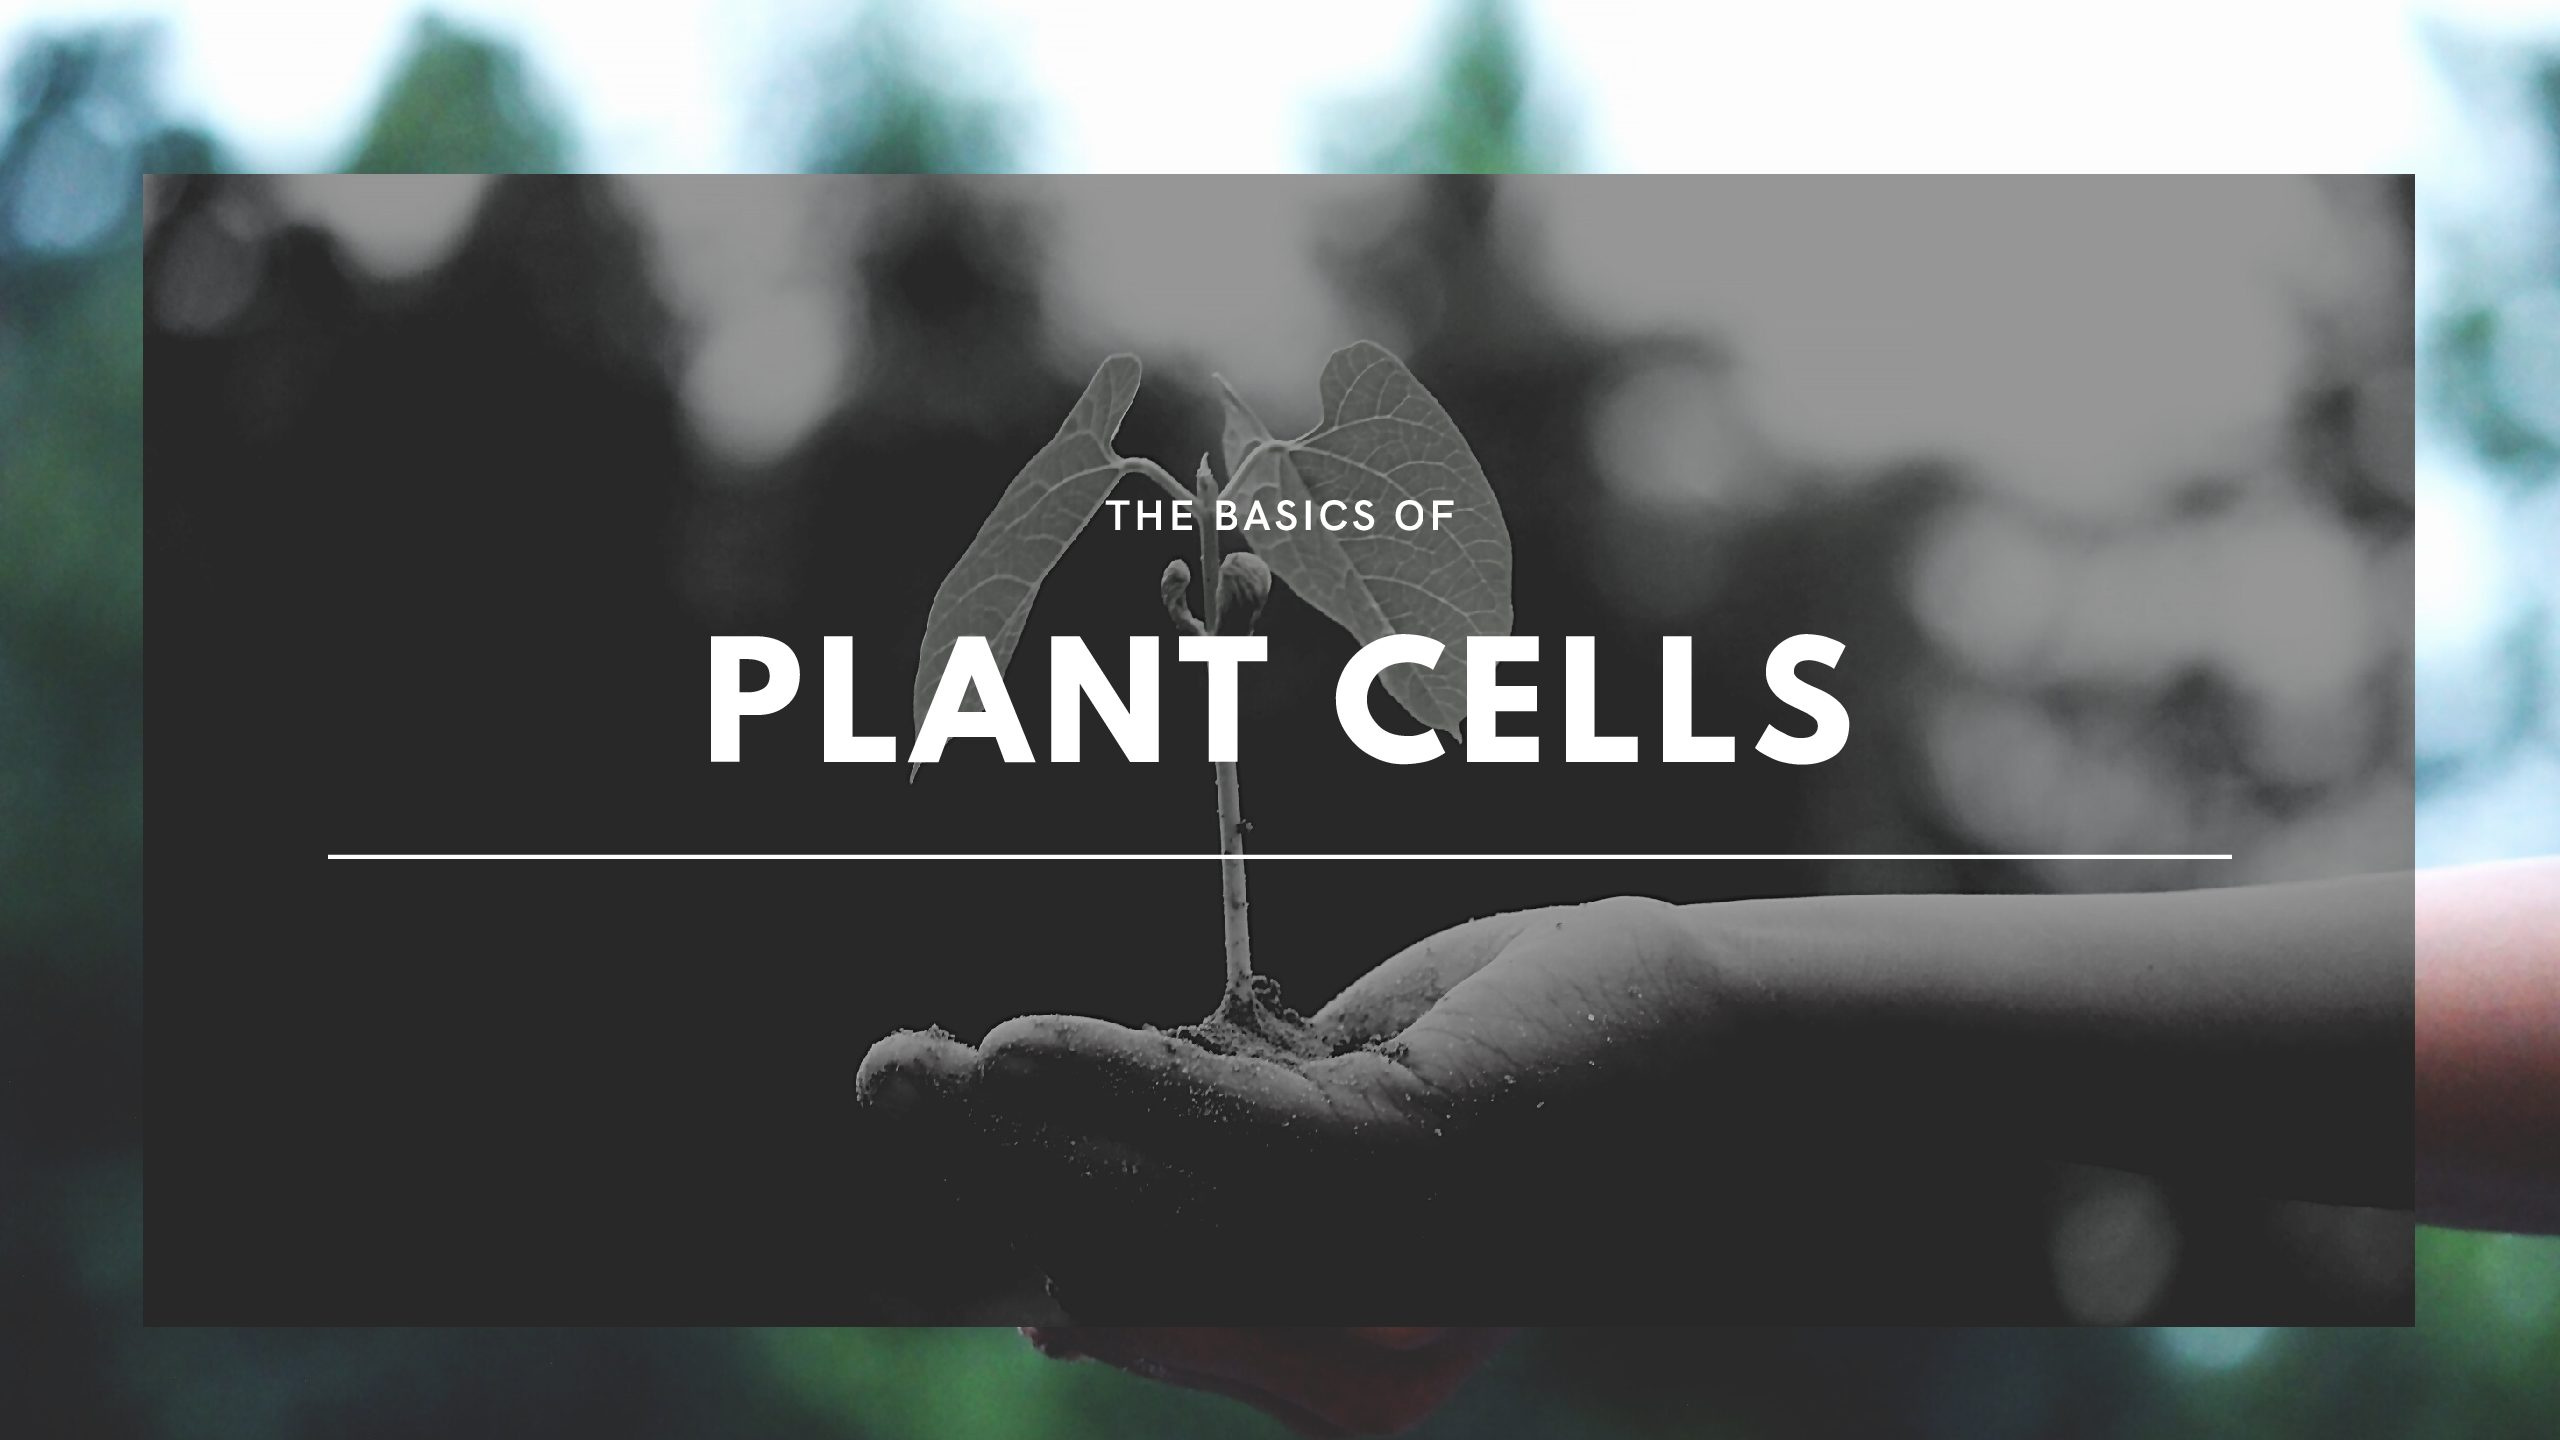 The Basics of Plant Cells